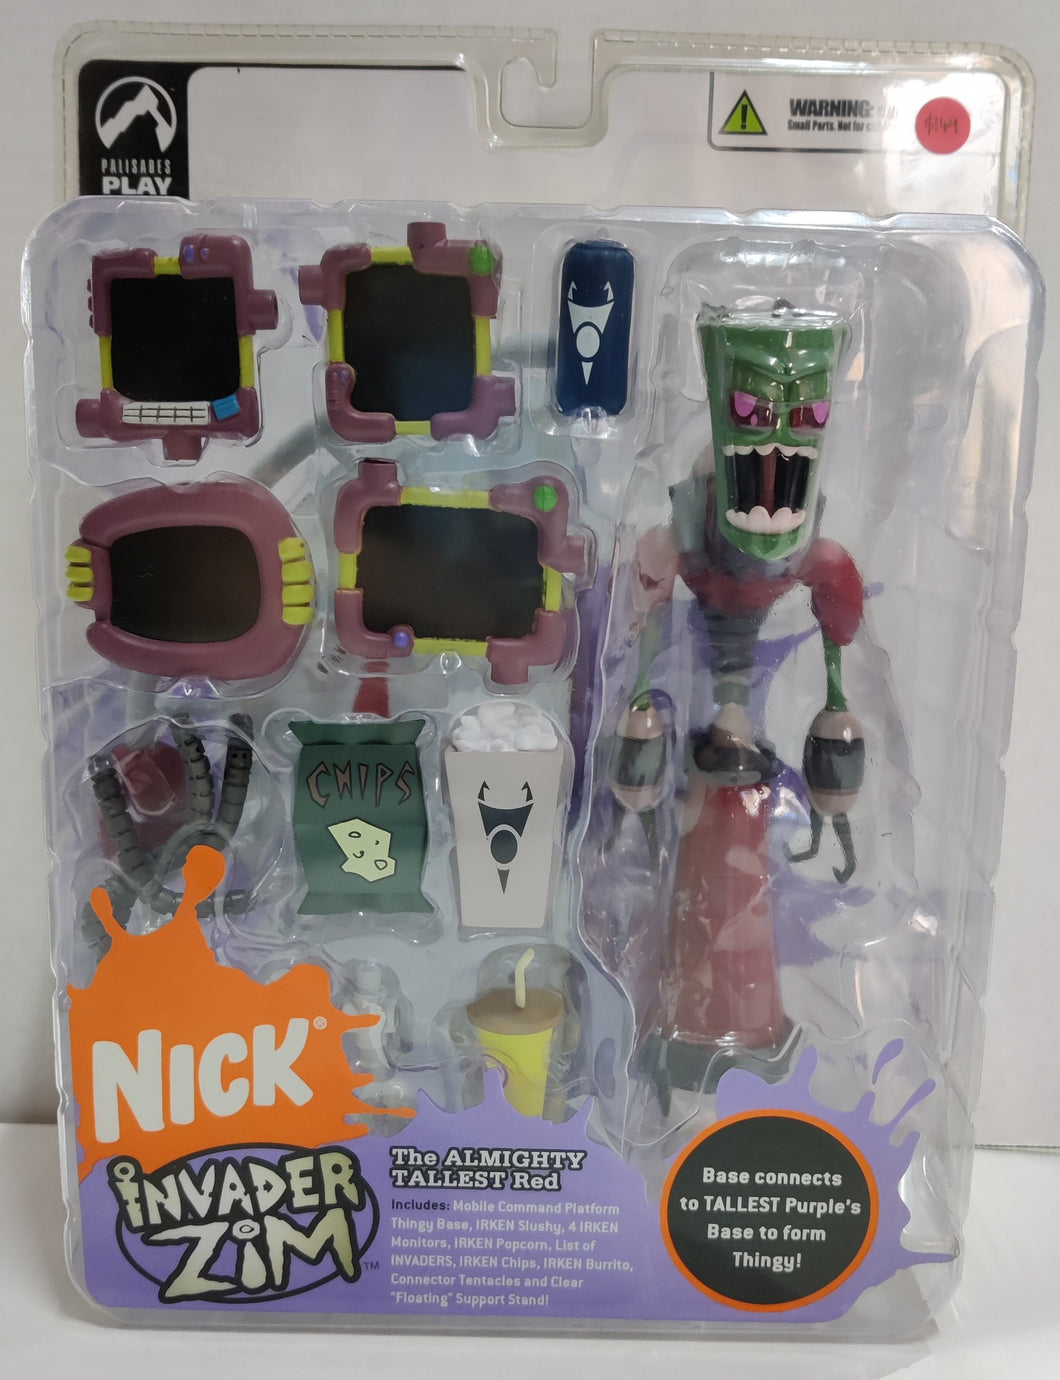 Nickelodeon Invader Zim The Almighty Tallest Red Action Figure